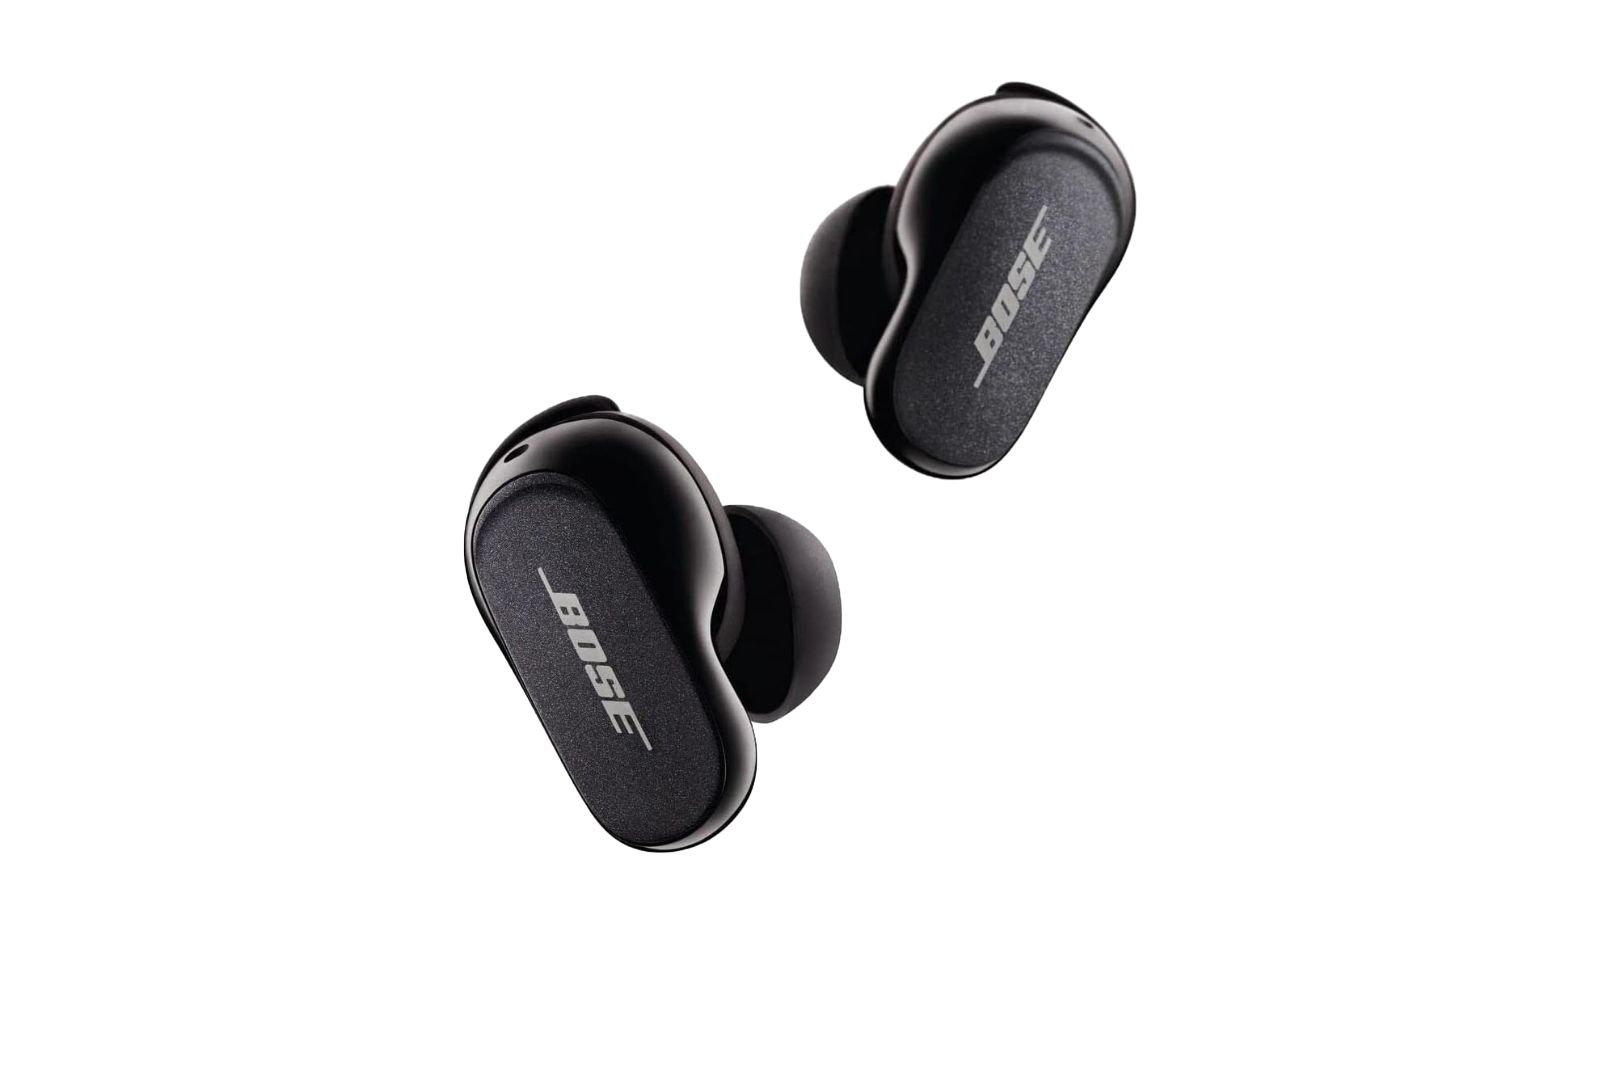 Black wireless earbuds with large ear tips and Bose written on the side.